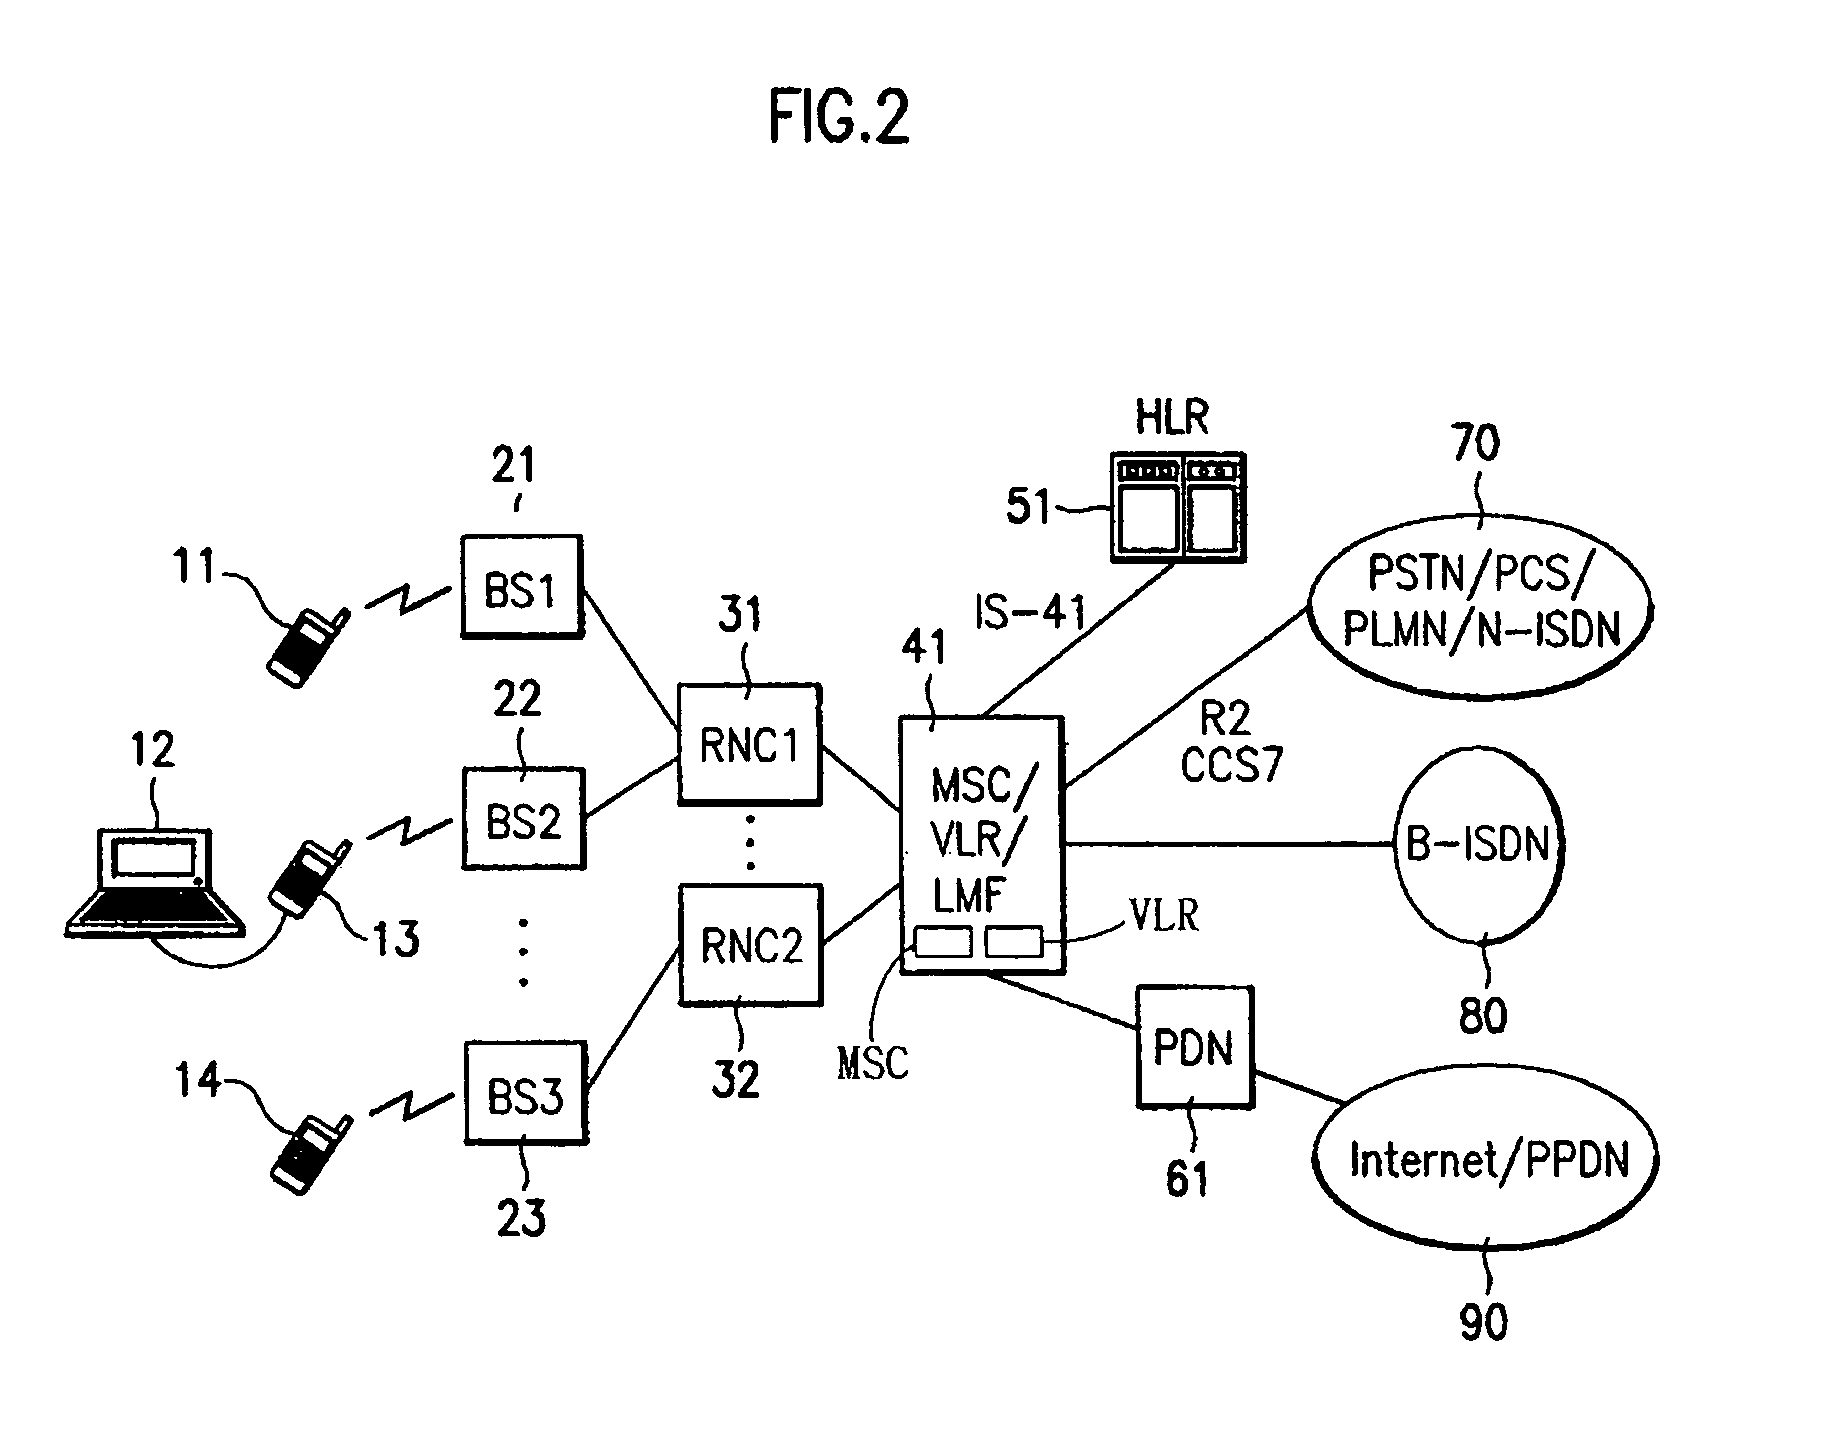 System and method for controlling packet data service in mobile communication network